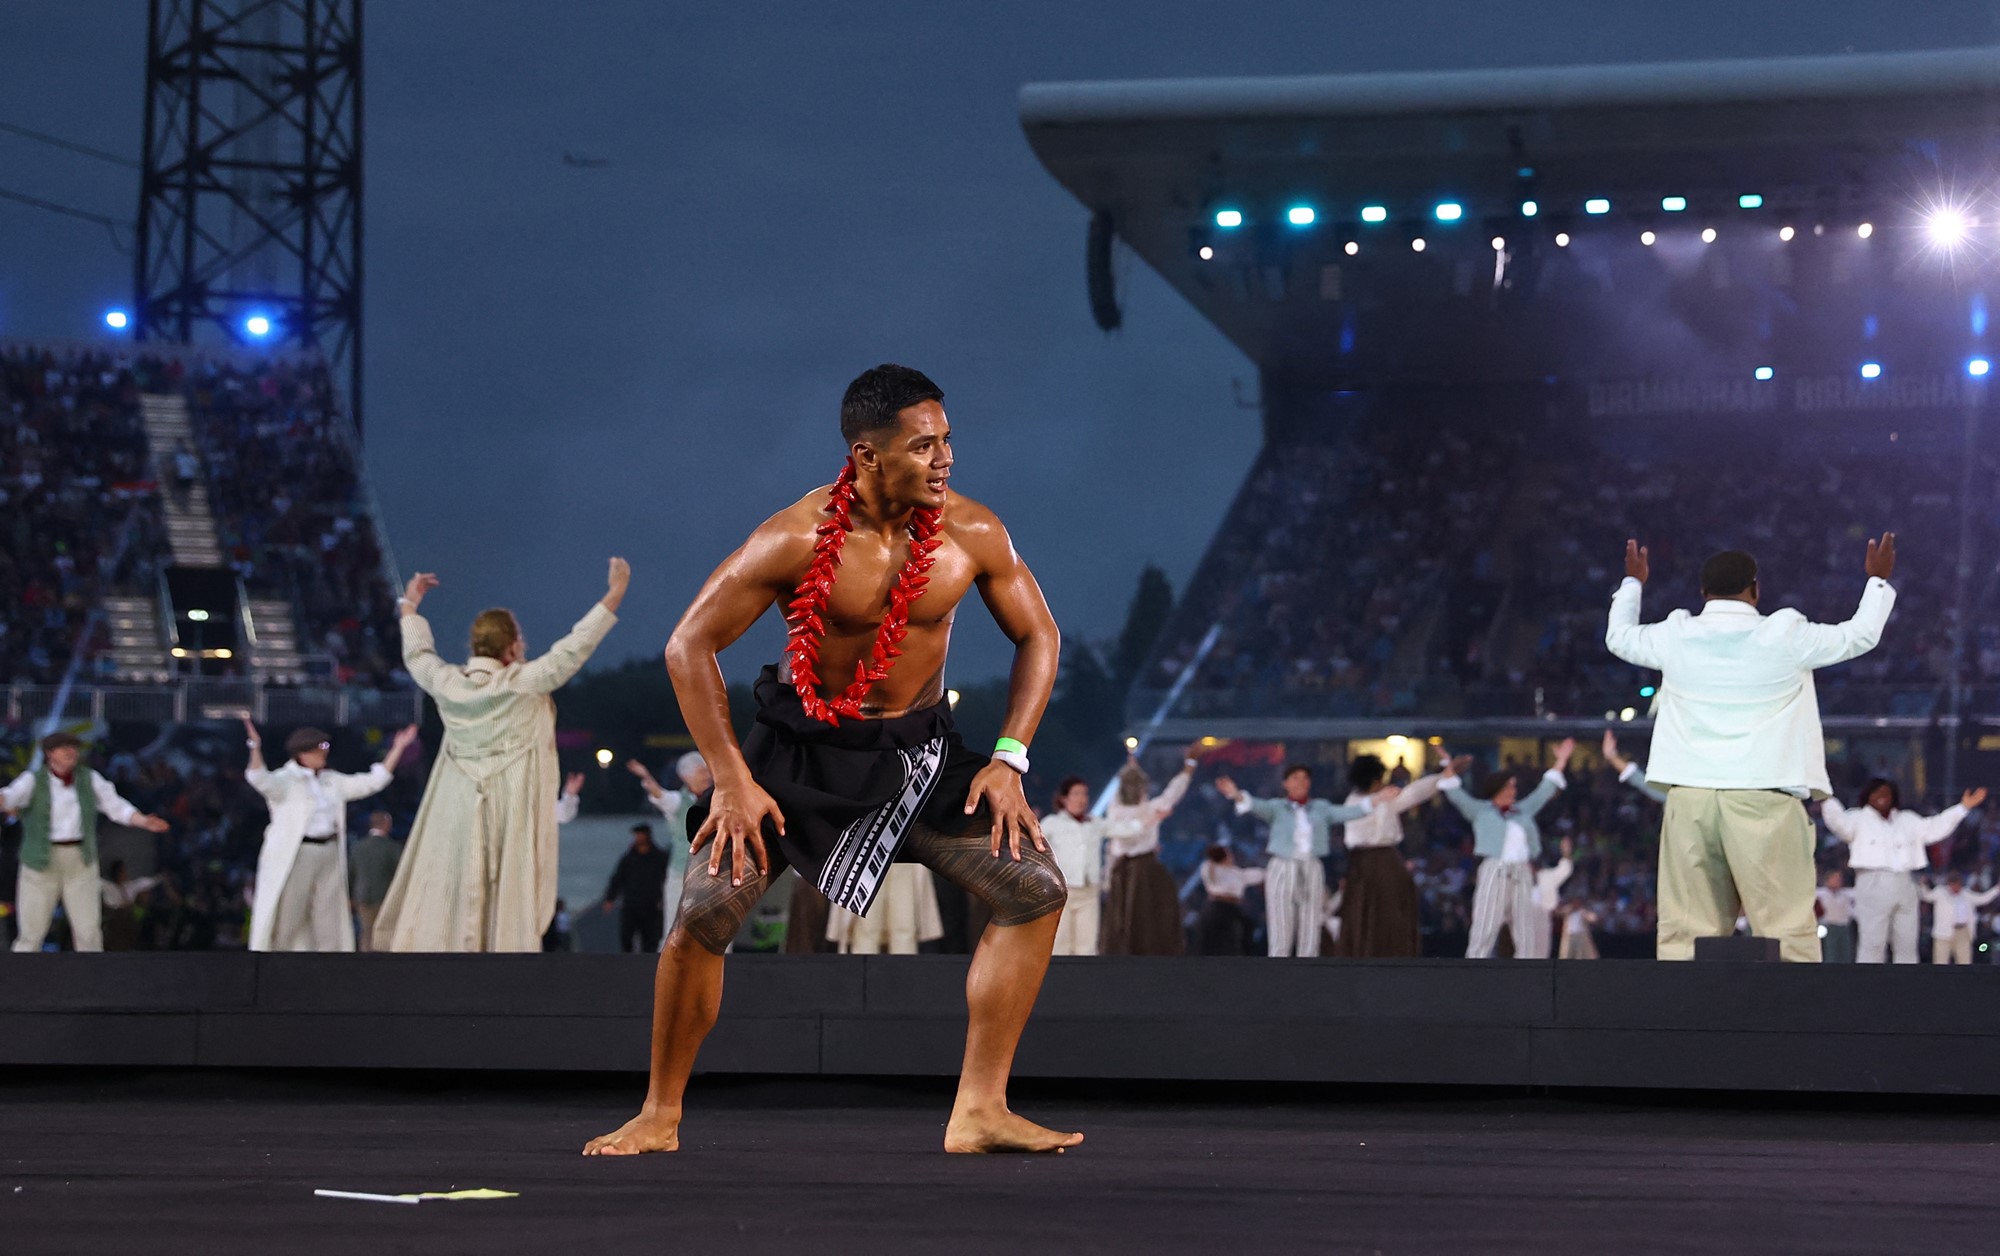 an athlete from samoa in traditional dress dances during the commonwealth games opening ceremony